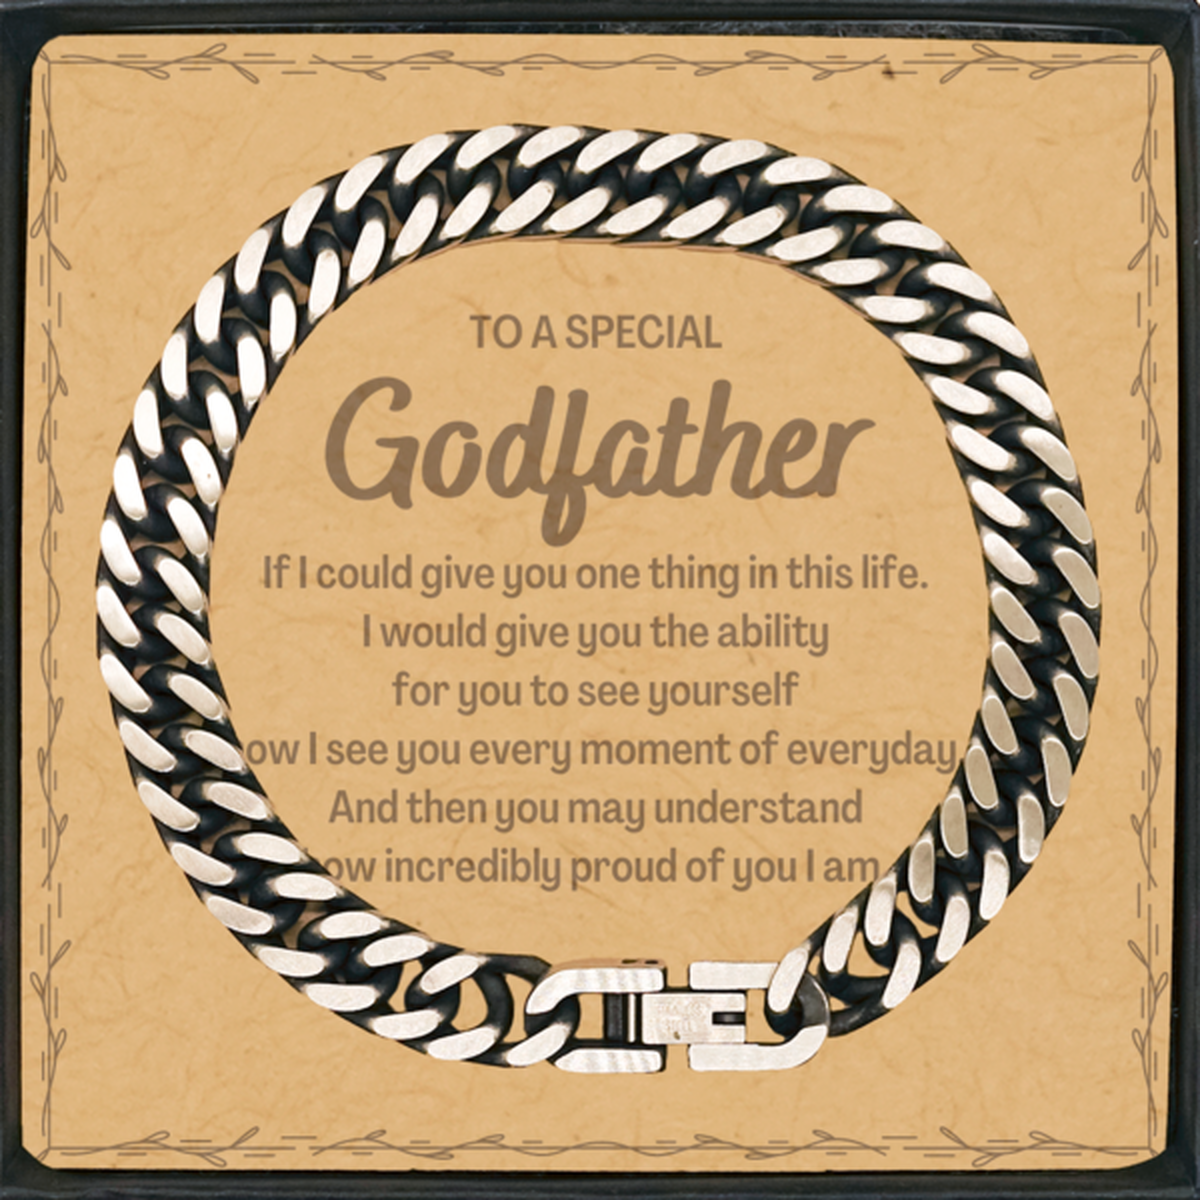 To My Godfather Cuban Link Chain Bracelet, Gifts For Godfather Message Card, Inspirational Gifts for Christmas Birthday, Epic Gifts for Godfather To A Special Godfather how incredibly proud of you I am